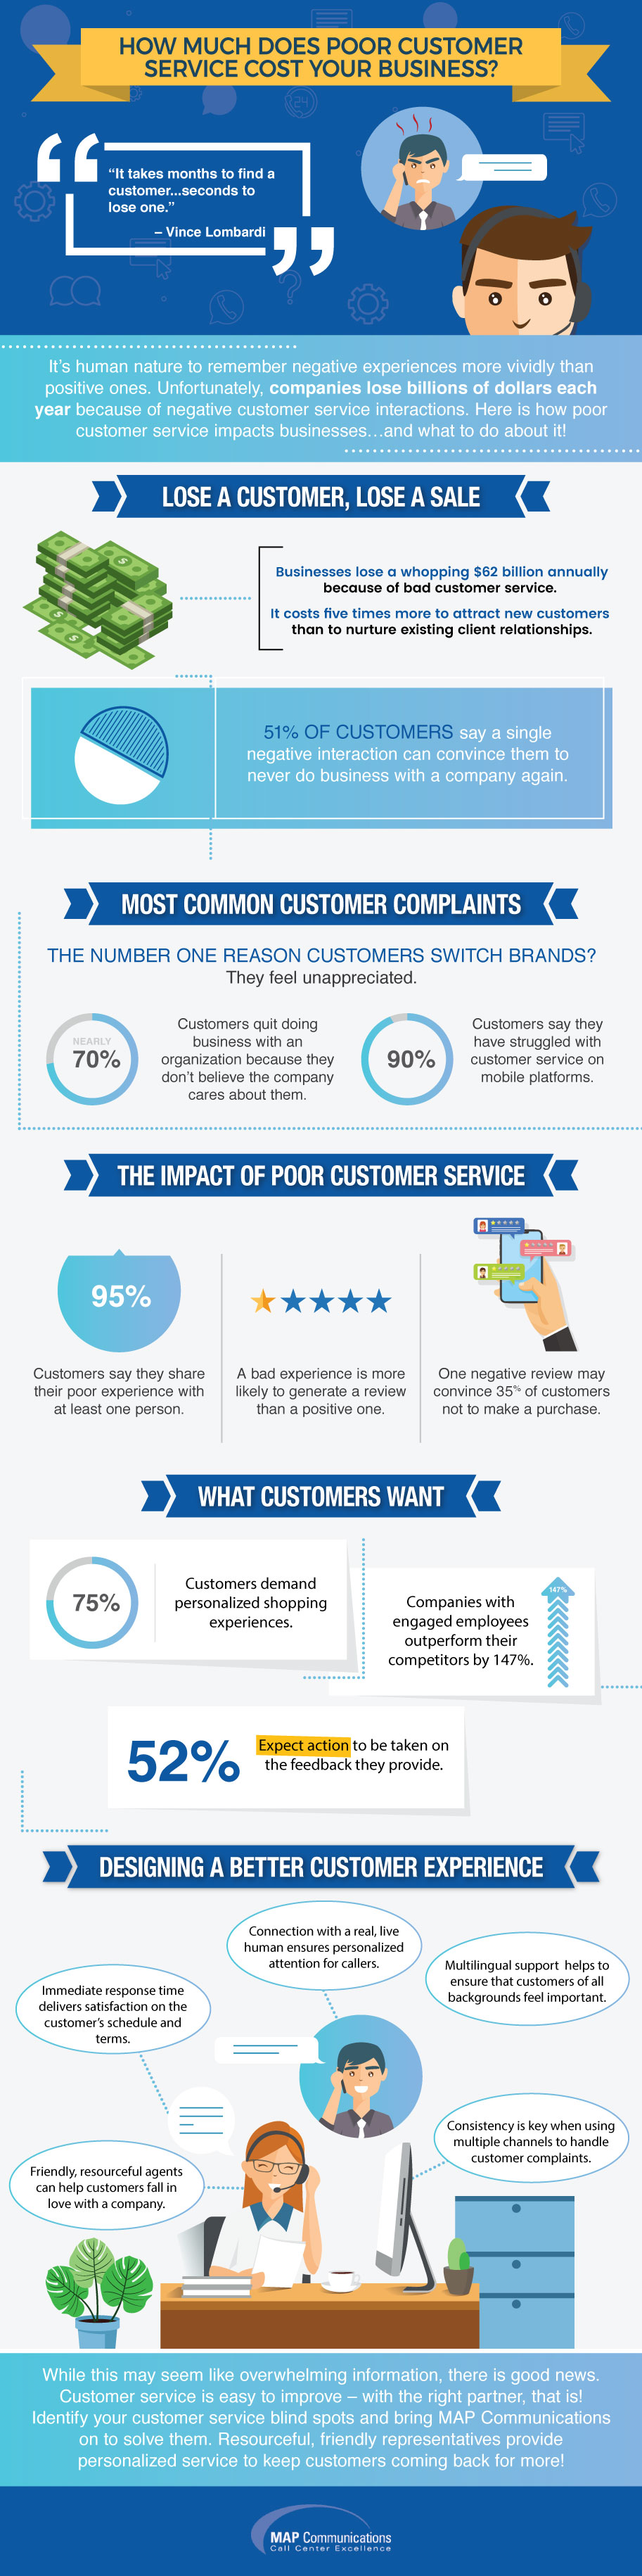 How Much Does Poor Customer Service Cost Your Business